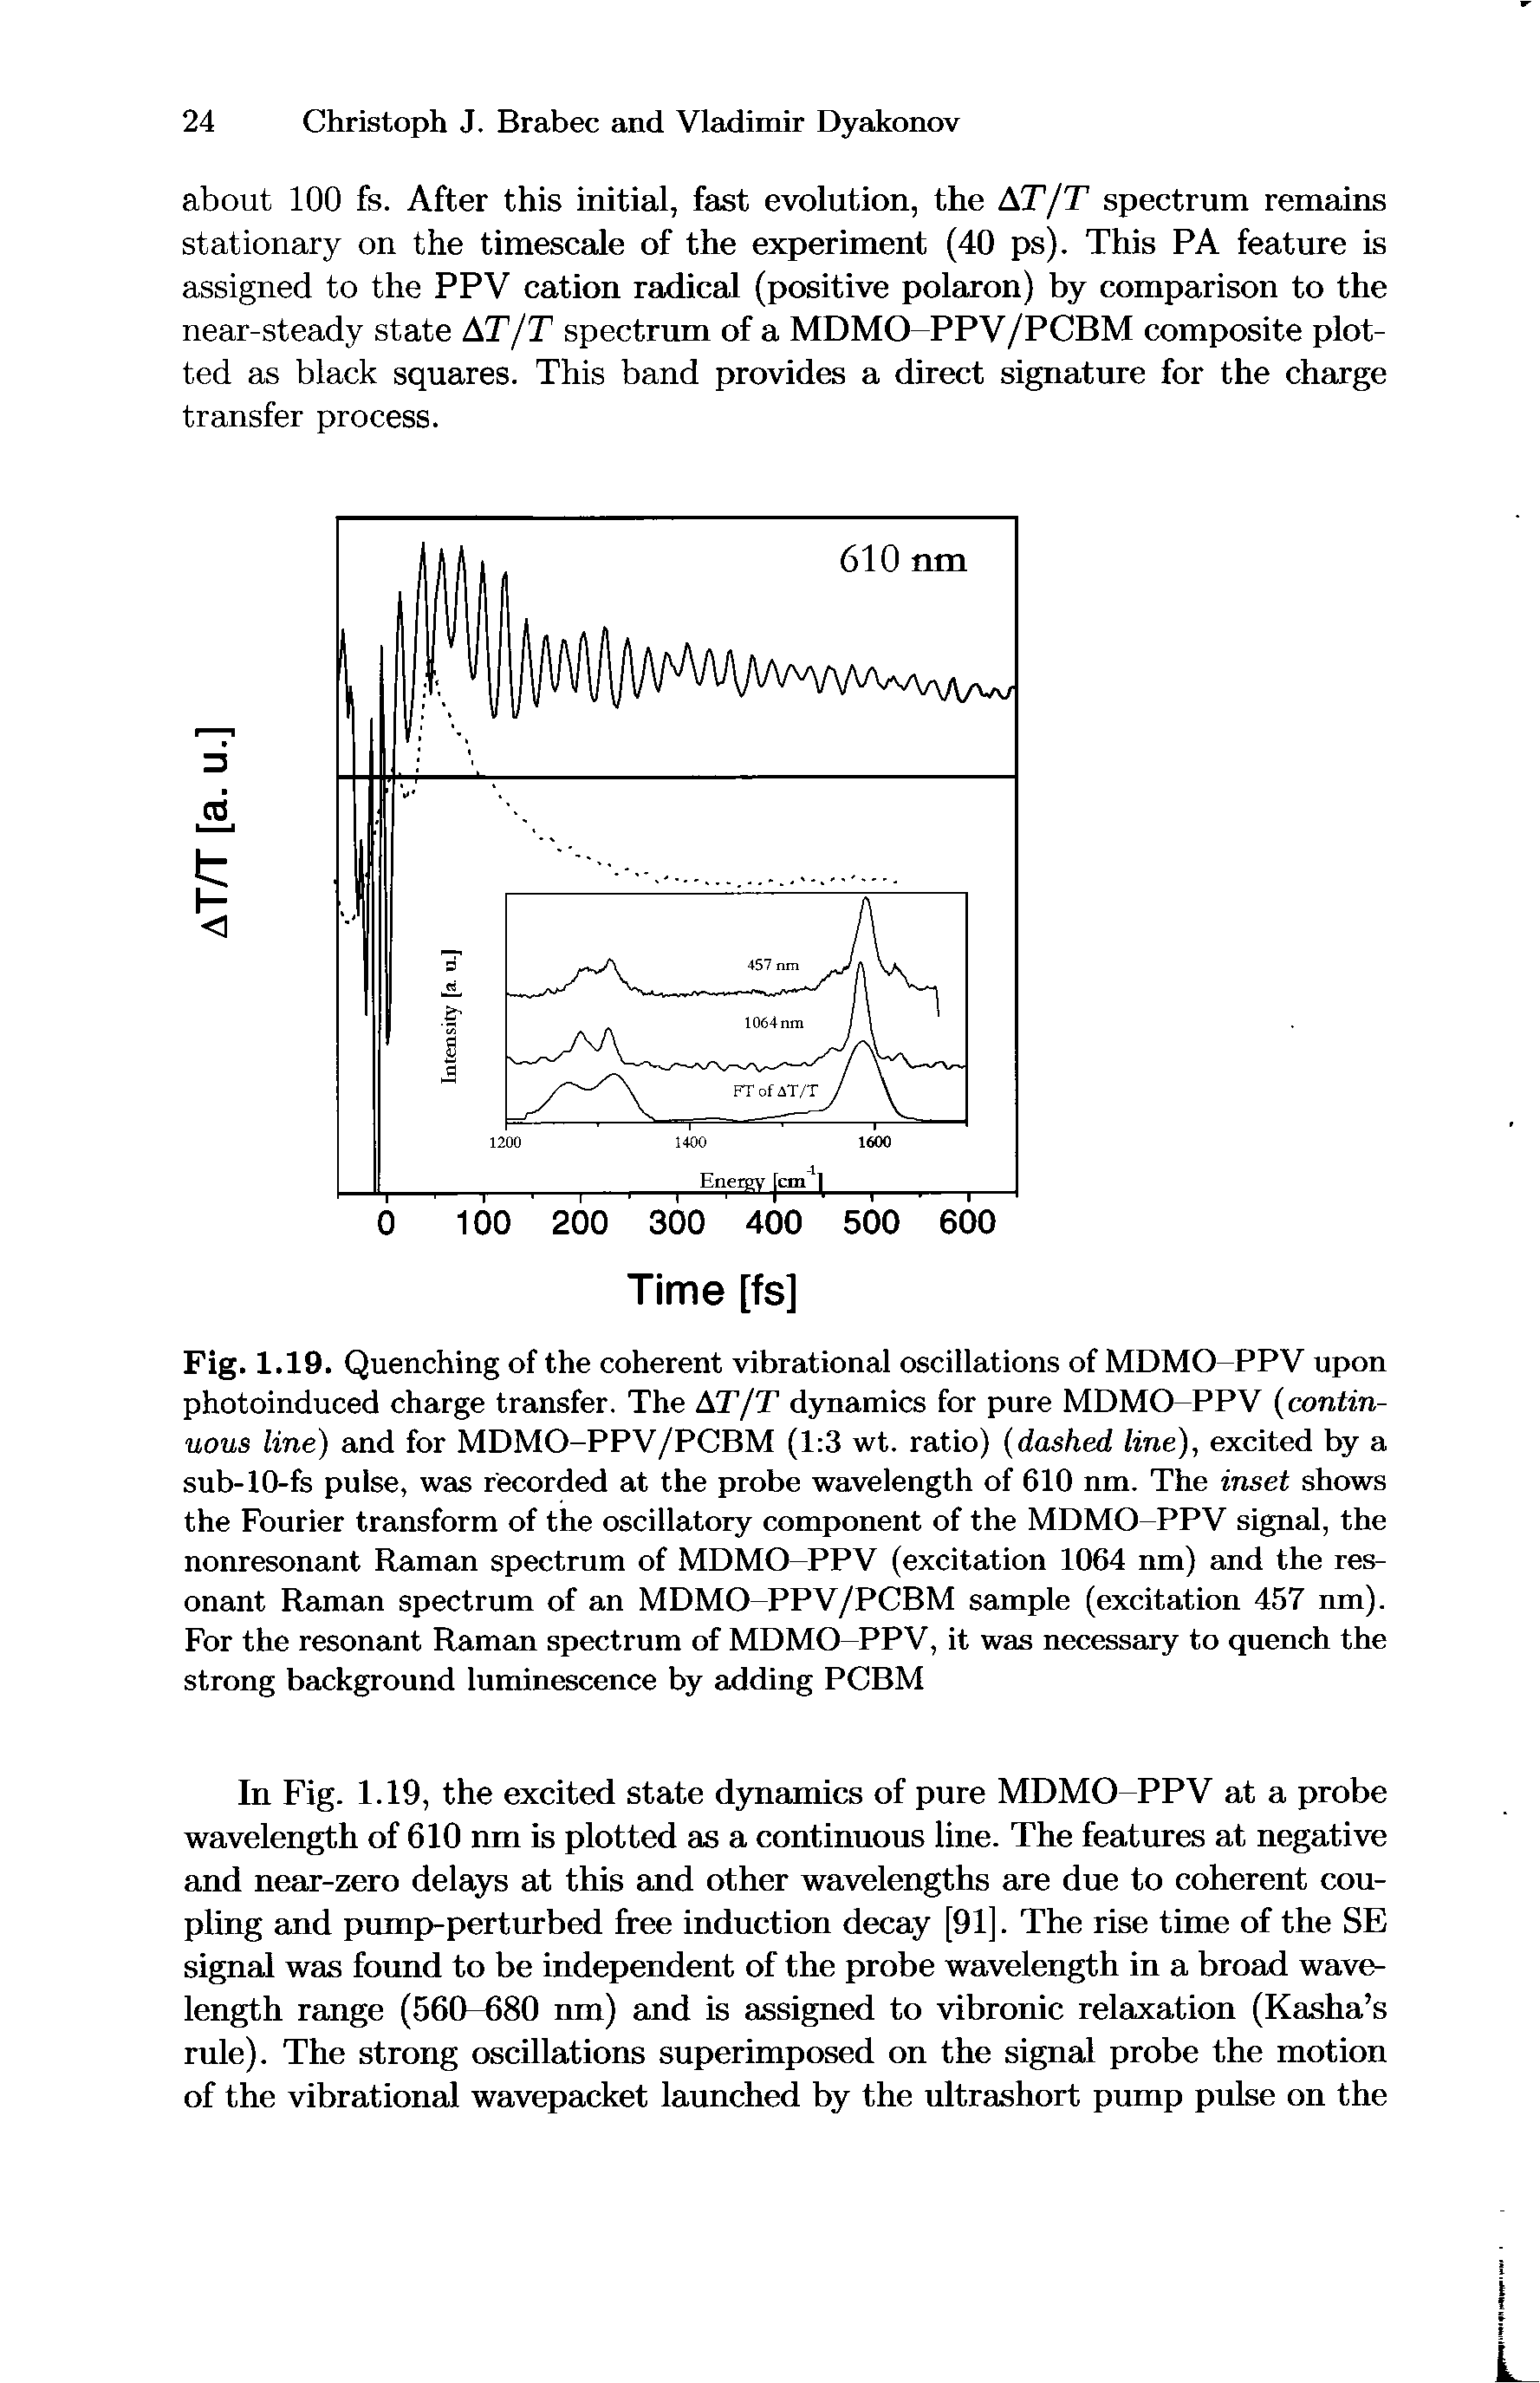 Fig. 1.19. Quenching of the coherent vibrational oscillations of MDMO-PPV upon photoinduced charge transfer. The AT/T dynamics for pure MDMO-PPV (continuous line) and for MDMO-PPV/PCBM (1 3 wt. ratio) (dashed line), excited by a sub-10-fs pulse, was recorded at the probe wavelength of 610 nm. The inset shows the Fourier transform of the oscillatory component of the MDMO-PPV signal, the nonresonant Raman spectrum of MDMO-PPV (excitation 1064 nm) and the resonant Raman spectrum of an MDMO-PPV/PCBM sample (excitation 457 nm). For the resonant Raman spectrum of MDMO-PPV, it was necessary to quench the strong background luminescence by adding PCBM...